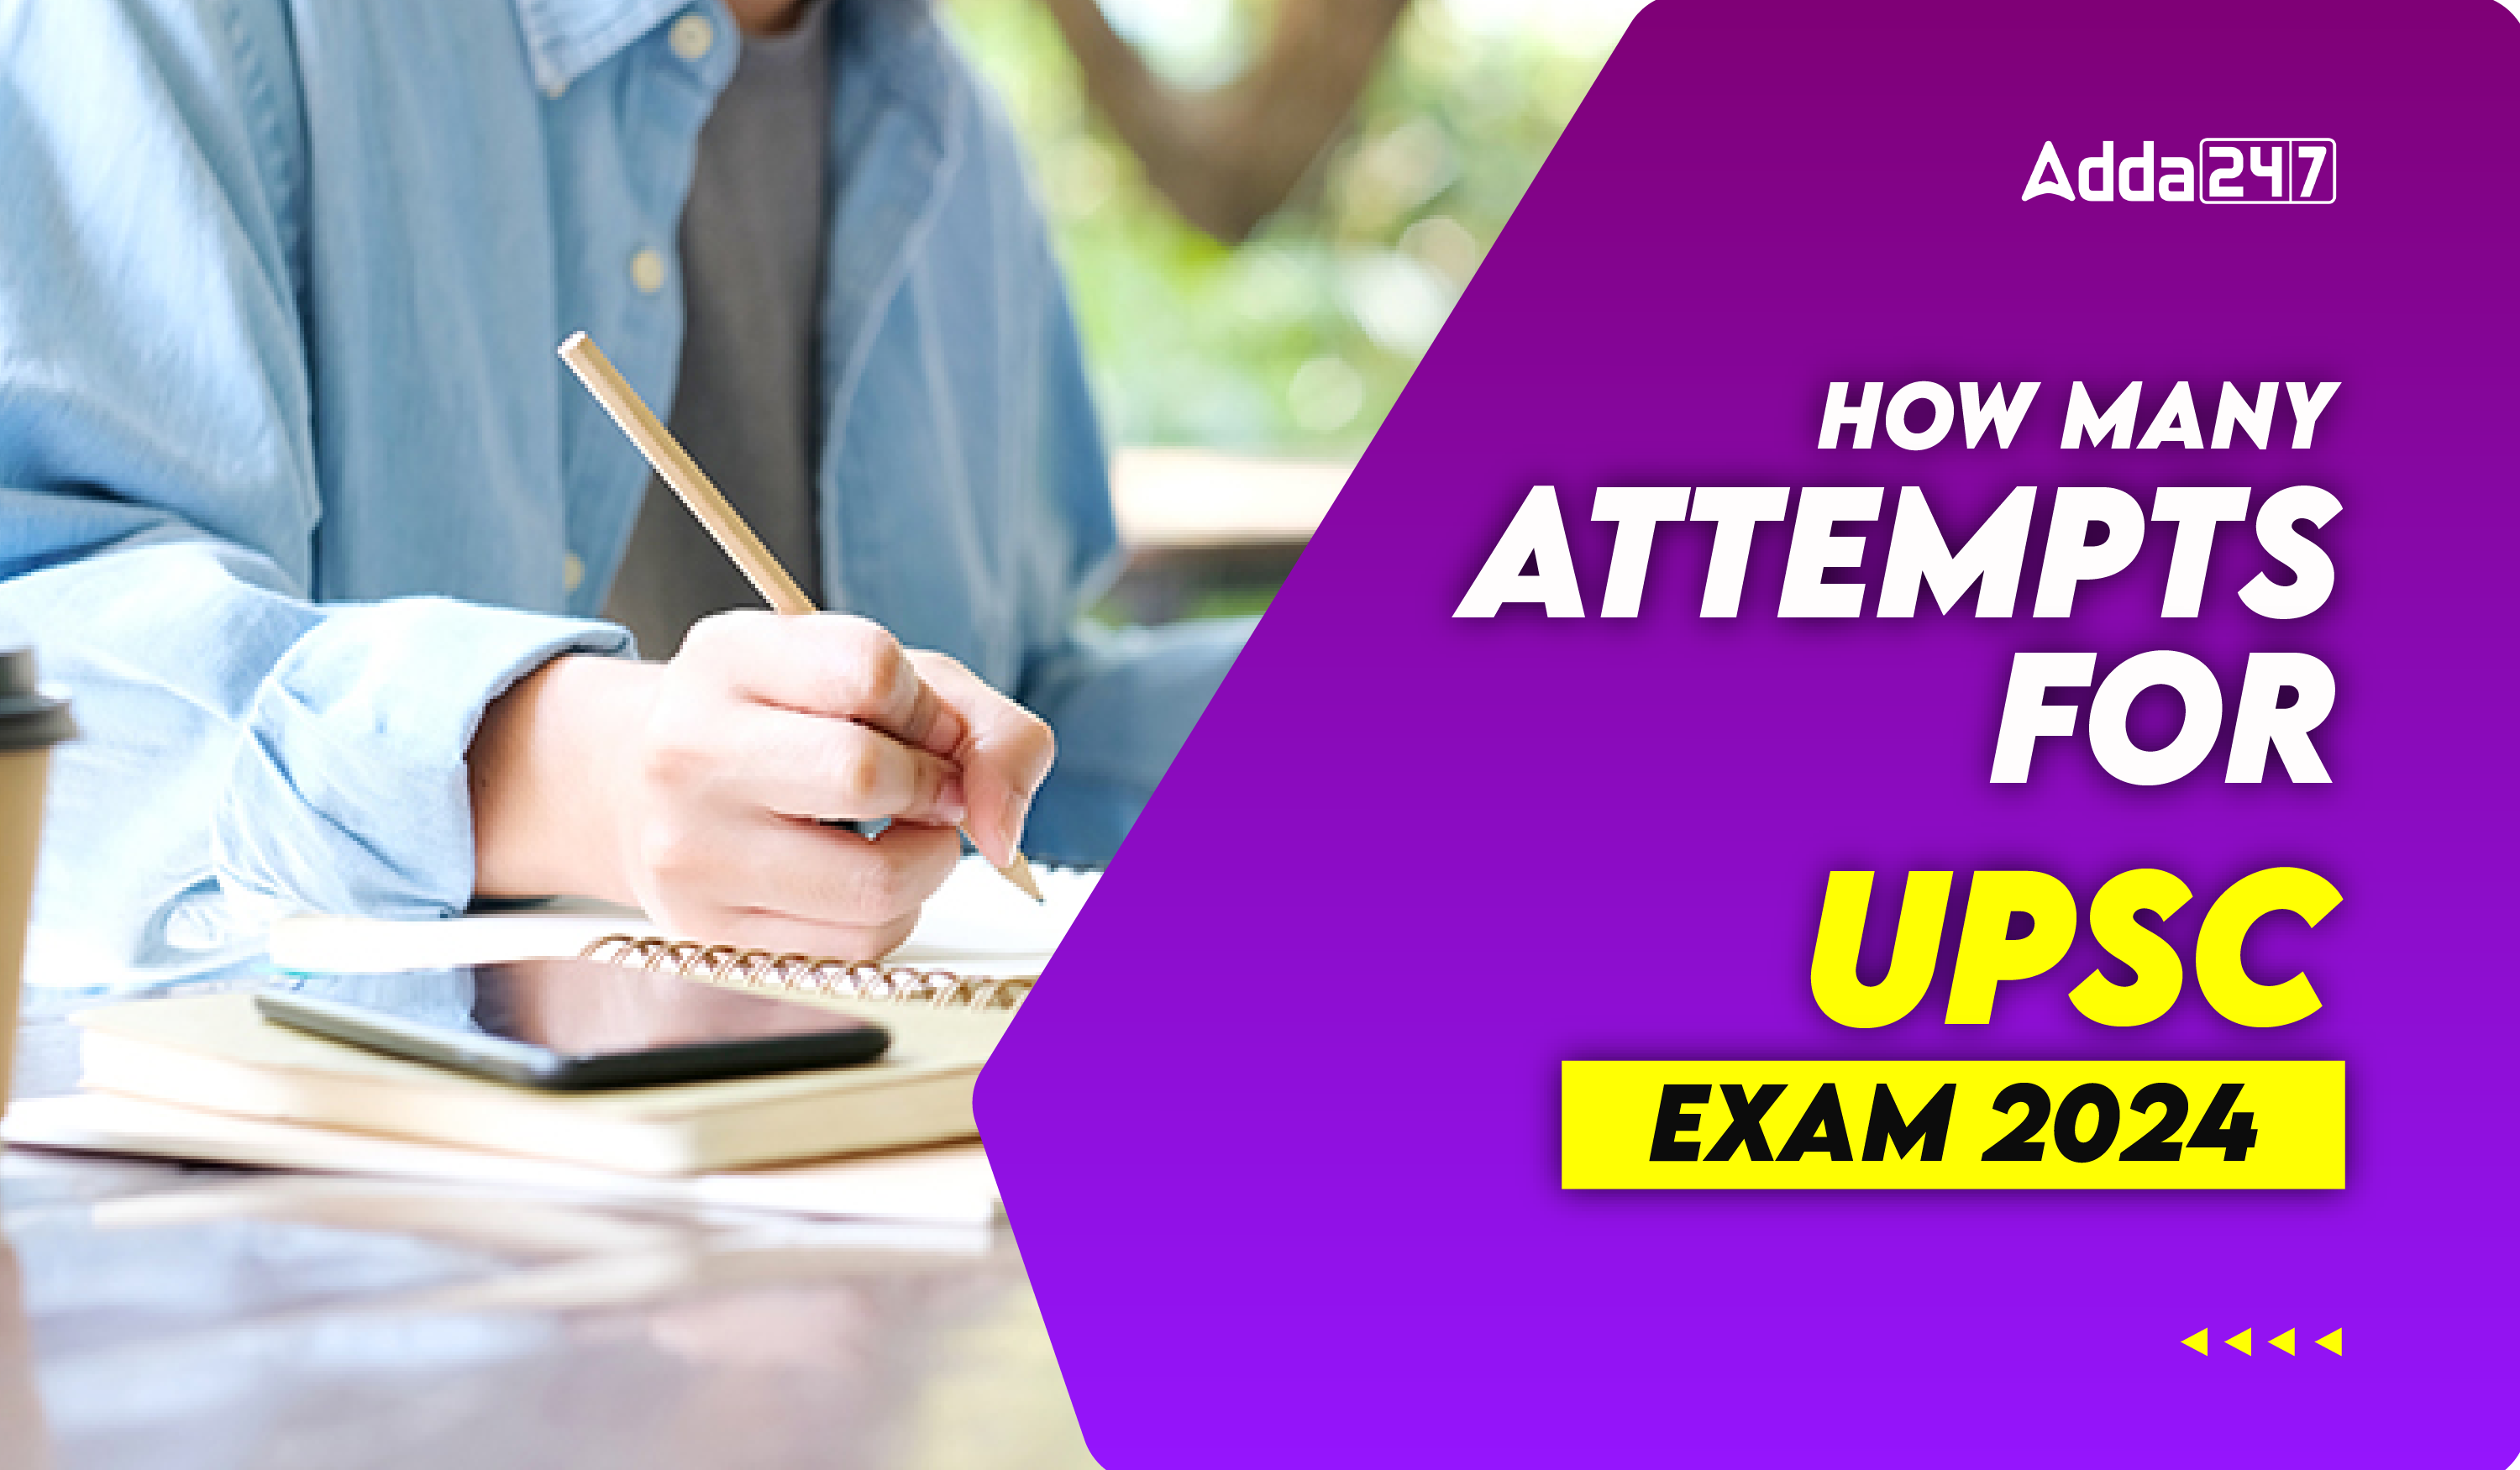 How many Attempts For UPSC